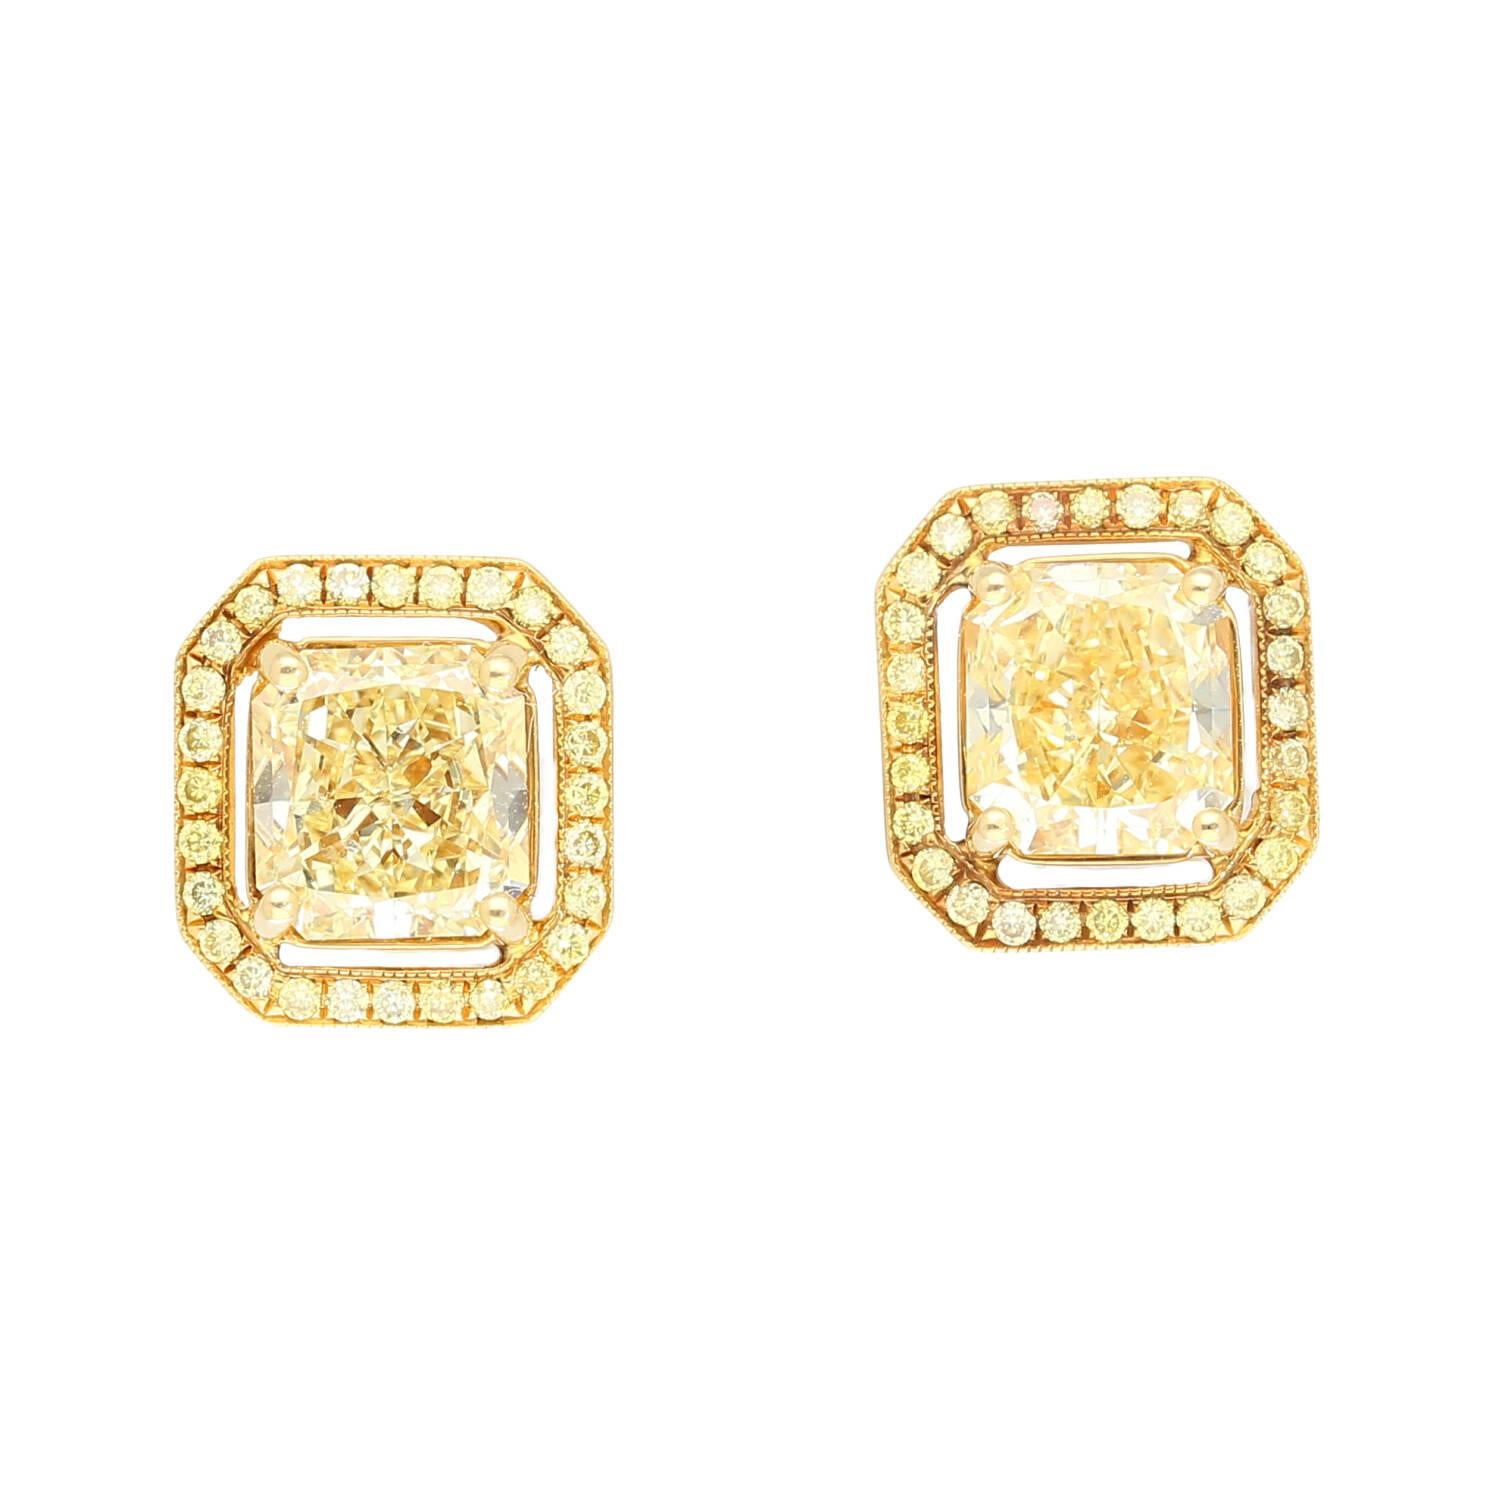 3-carat total weight fancy light yellow diamond stud earrings in 18k gold. Centering two radiant cut natural diamonds, each of which is GIA certified. The center stones feature a mesmerizing 1.50-carat internally flawless (IF) clarity and 1.42-carat